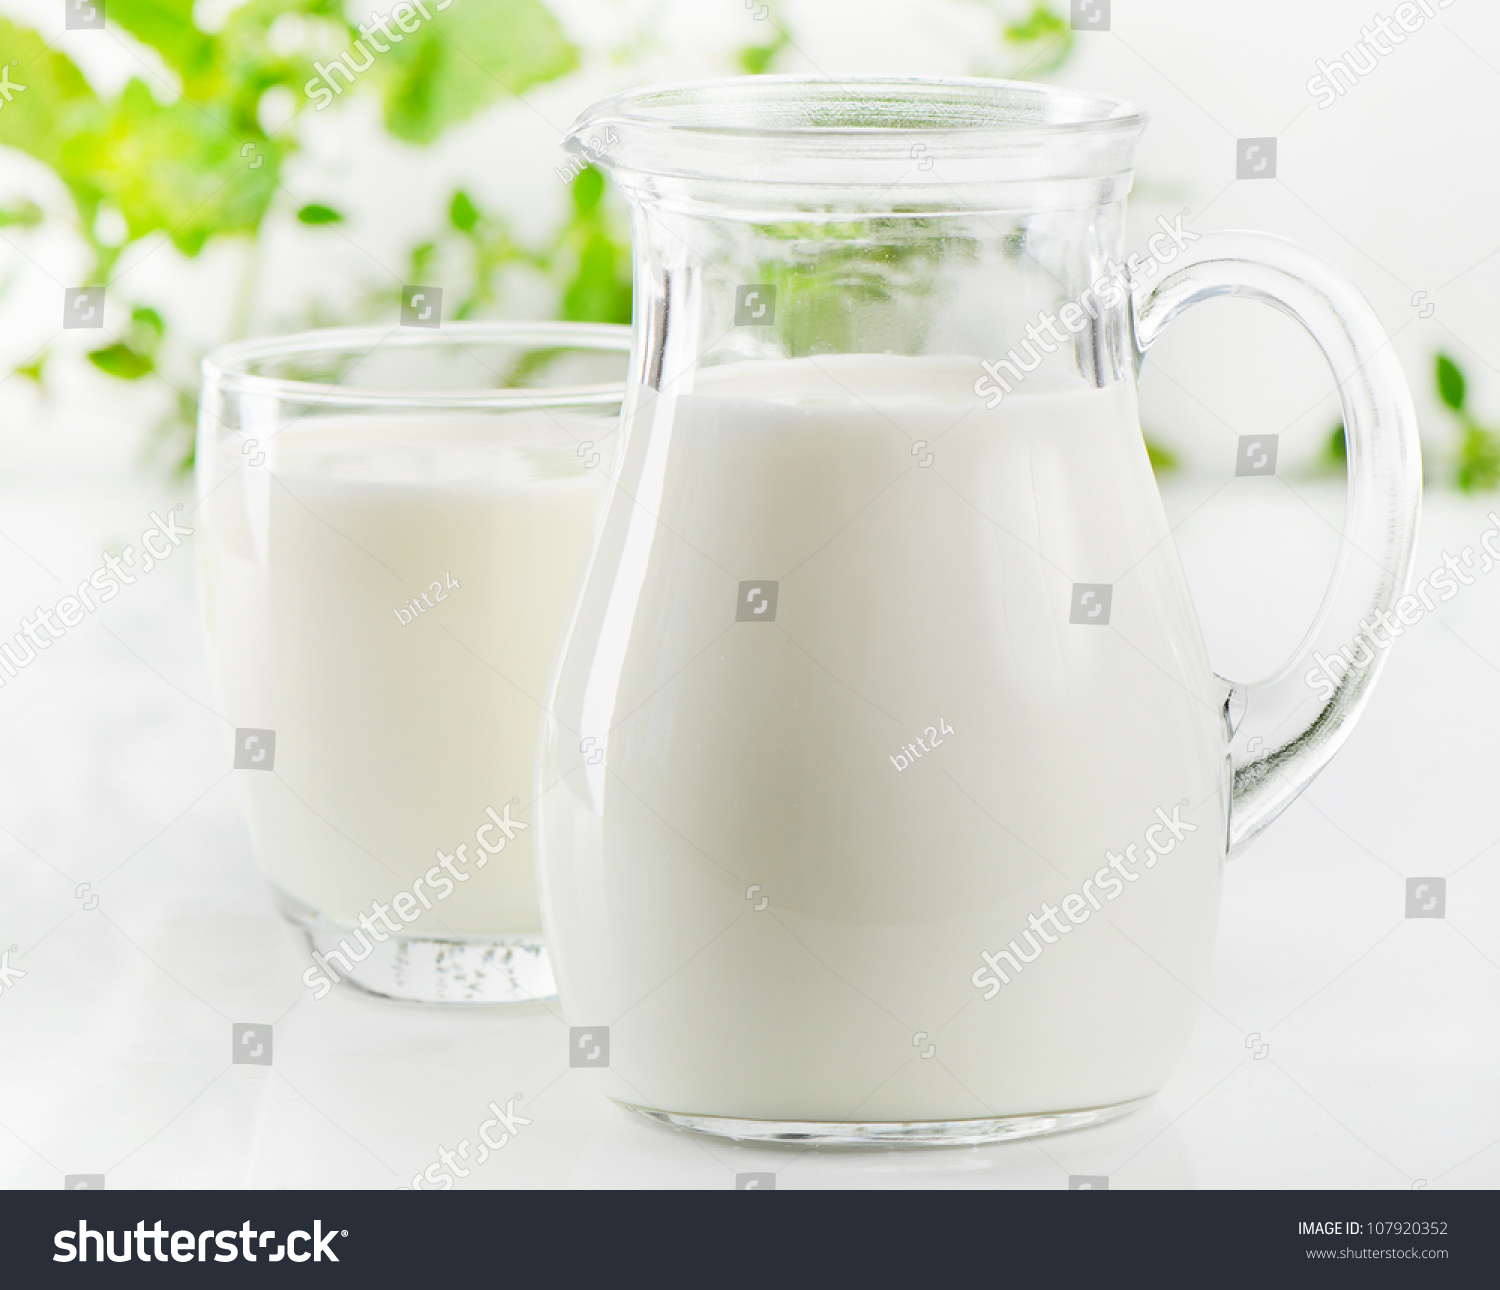 Glass jug and glass with milk #107920352